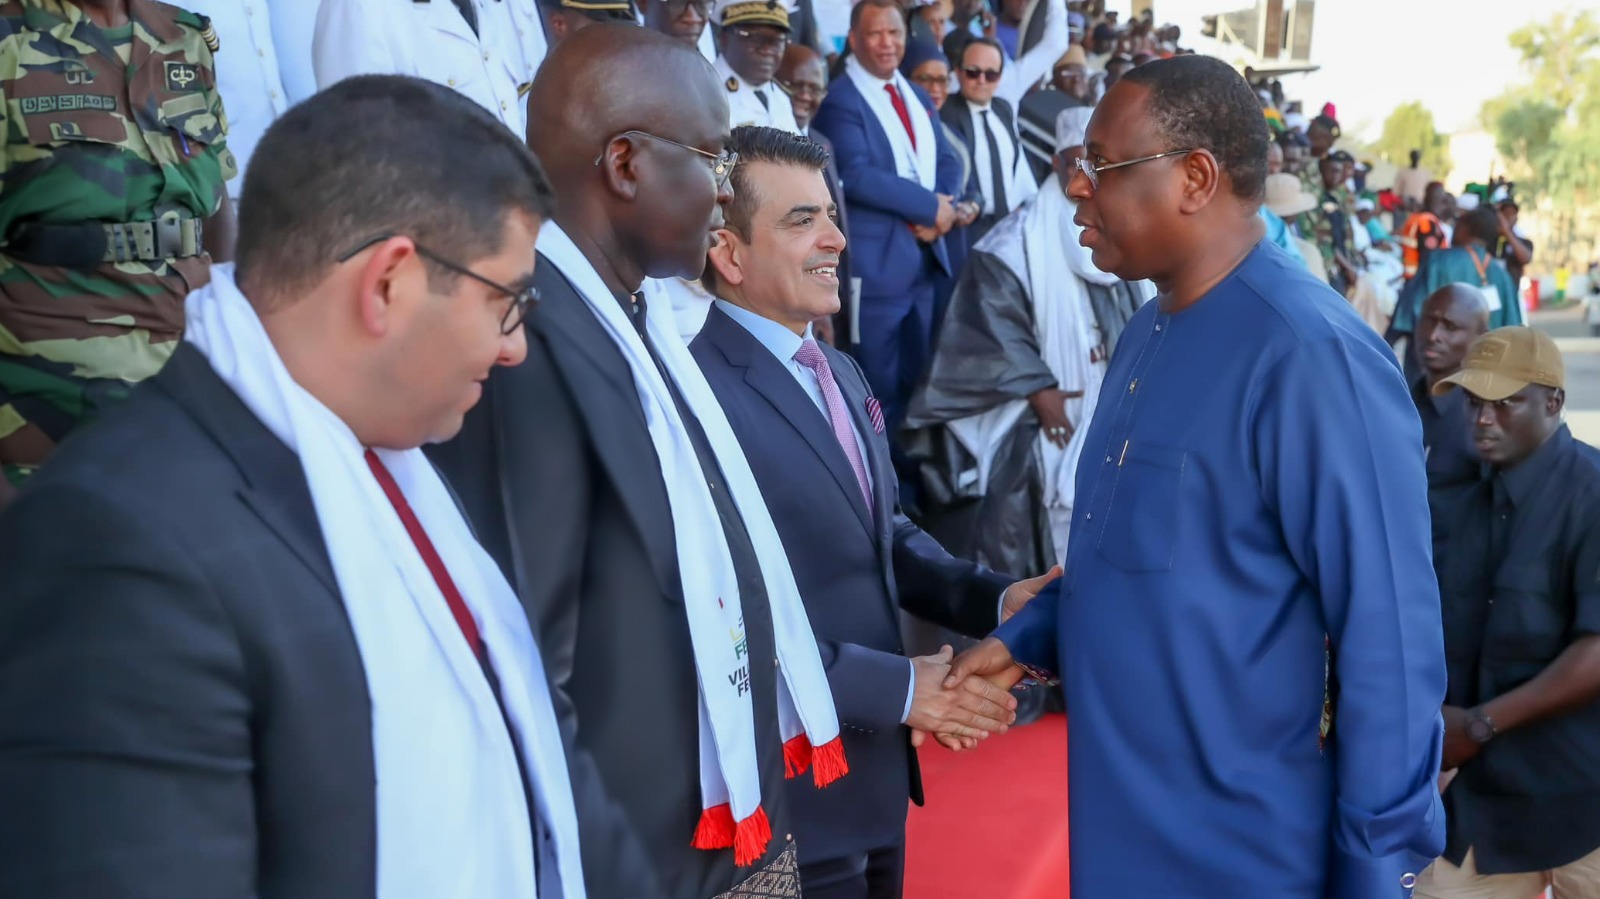 In the presence of President Macky Sall, ICESCO Director-General participates in the opening of the National Festival of Arts and Culture in Senegal